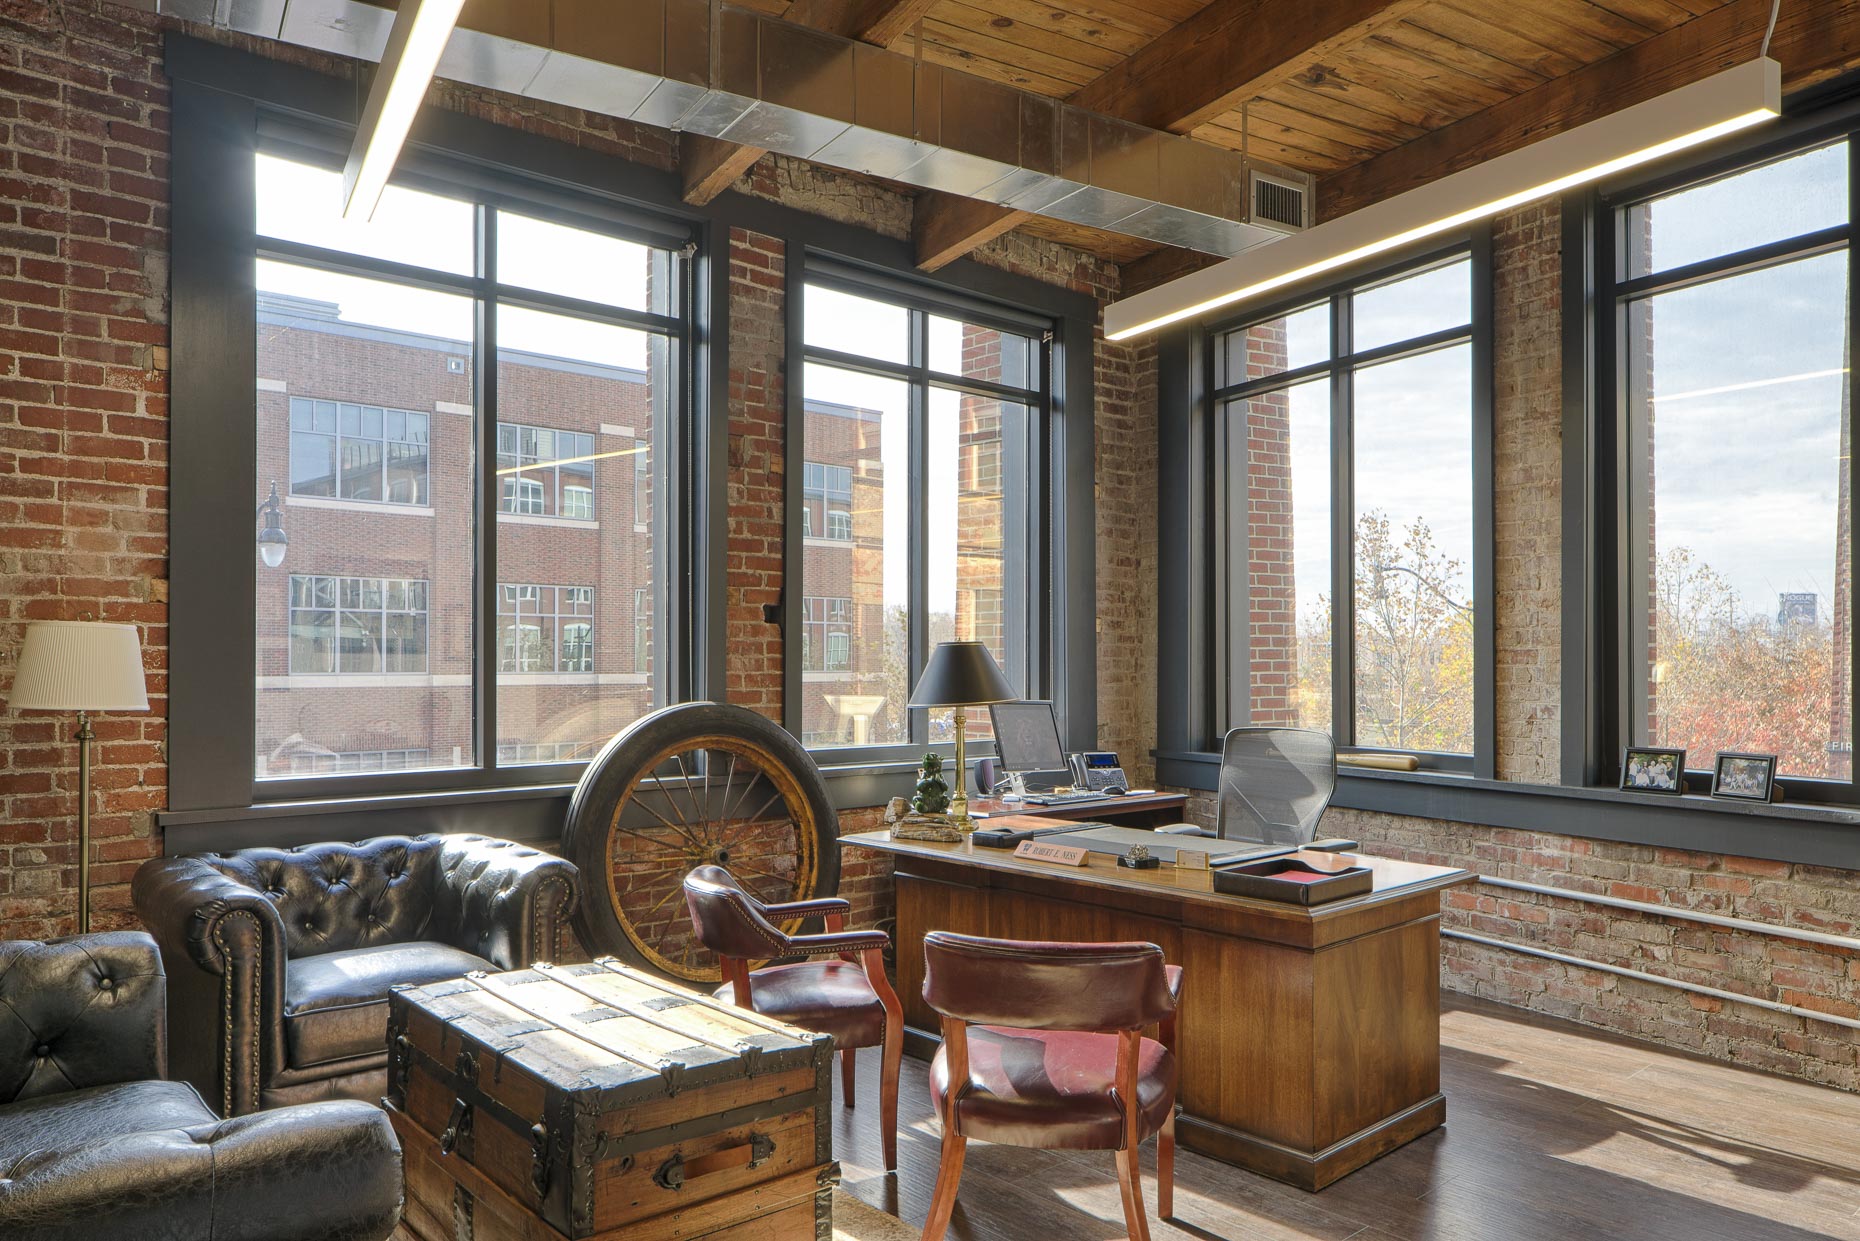 ODW Offices at The Buggyworks by M+A Architects & Turner Construction photographed by Lauren K Davis based in Columbus, Ohio